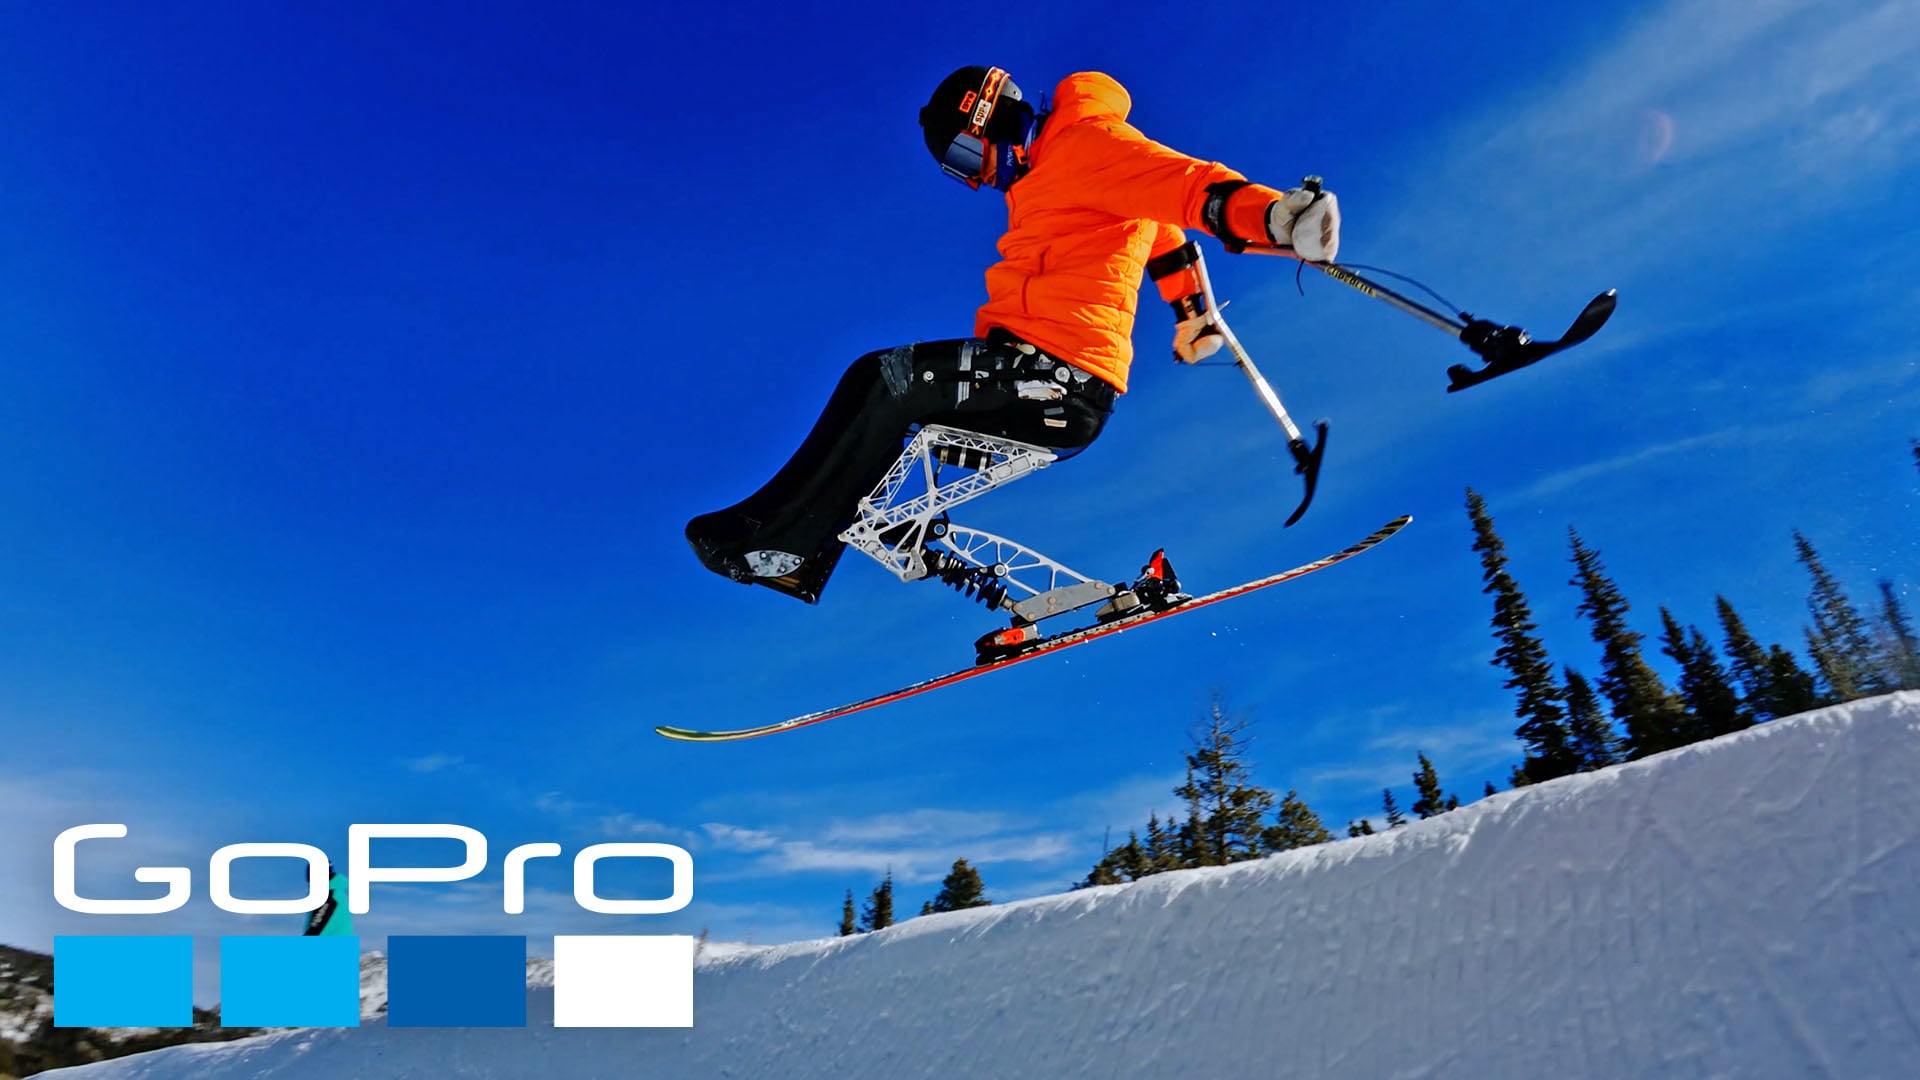 GoPro Sit Skiing with Trevor Kennison at Copper Mountain on Vimeo